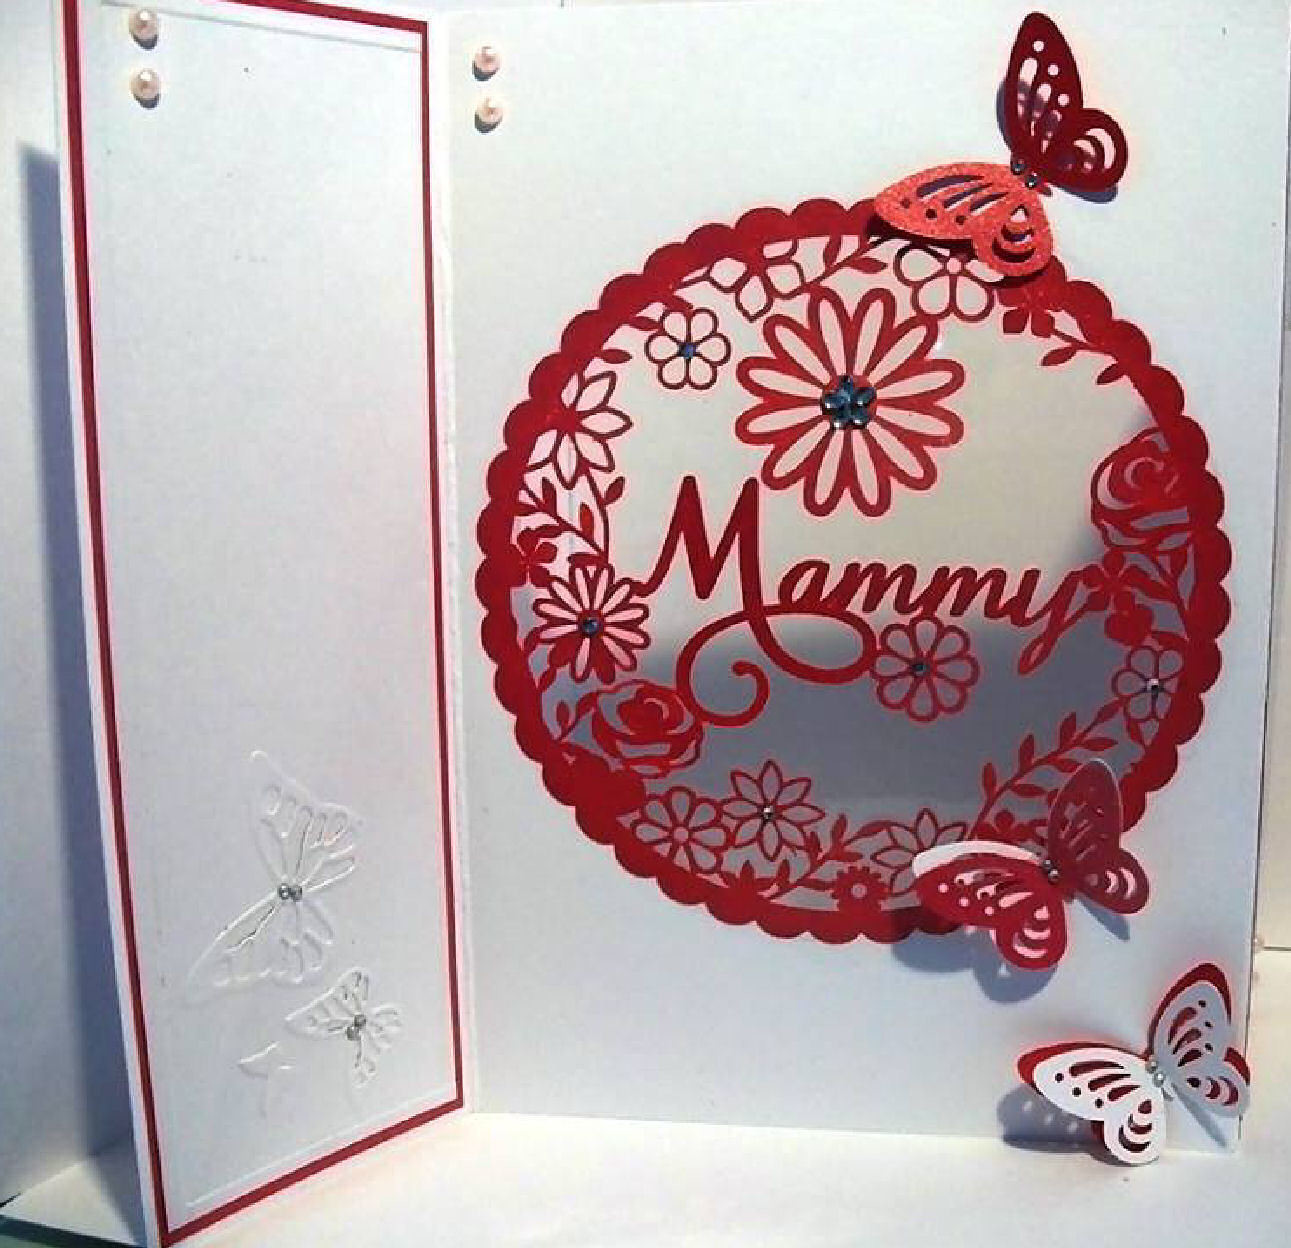 Mammy decorative round frame ideal for Mother's Day.